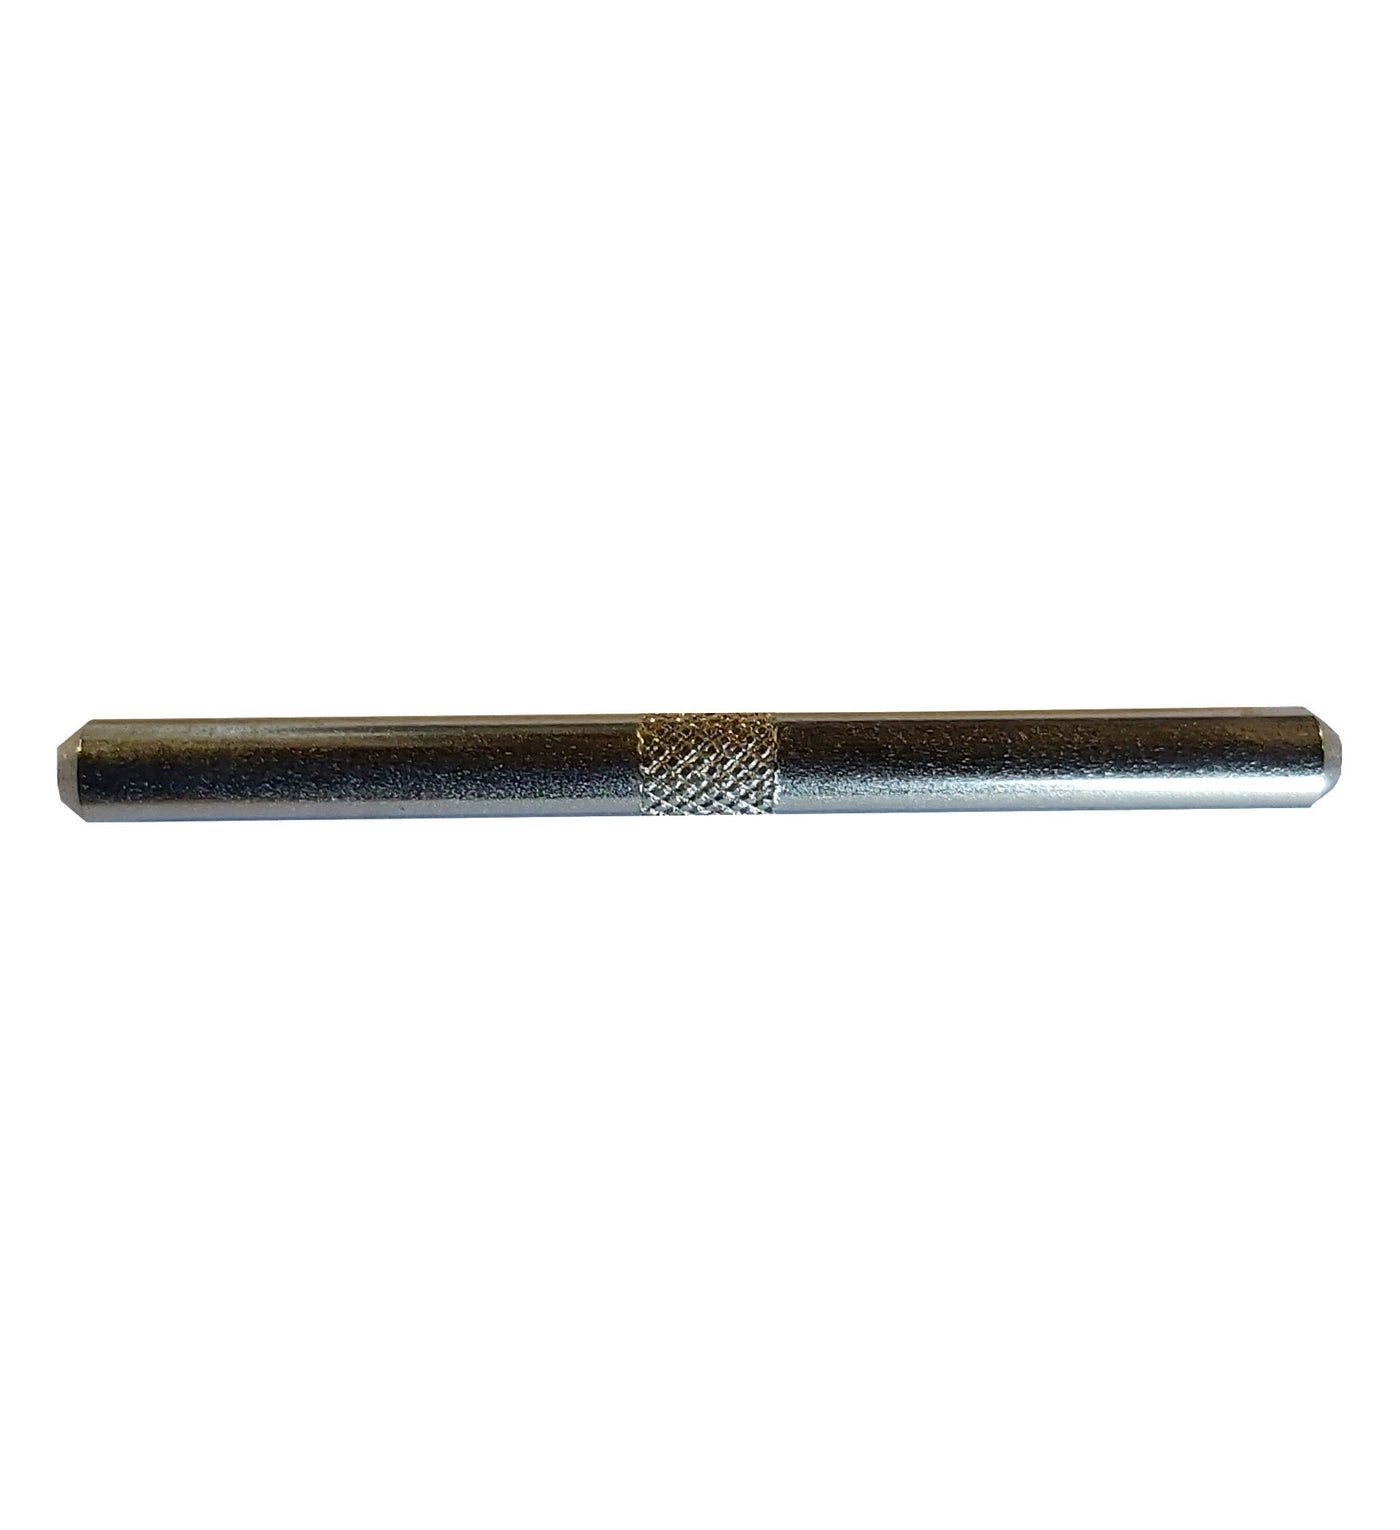 Silky Pole Saw Shaking Proof Rod Pin